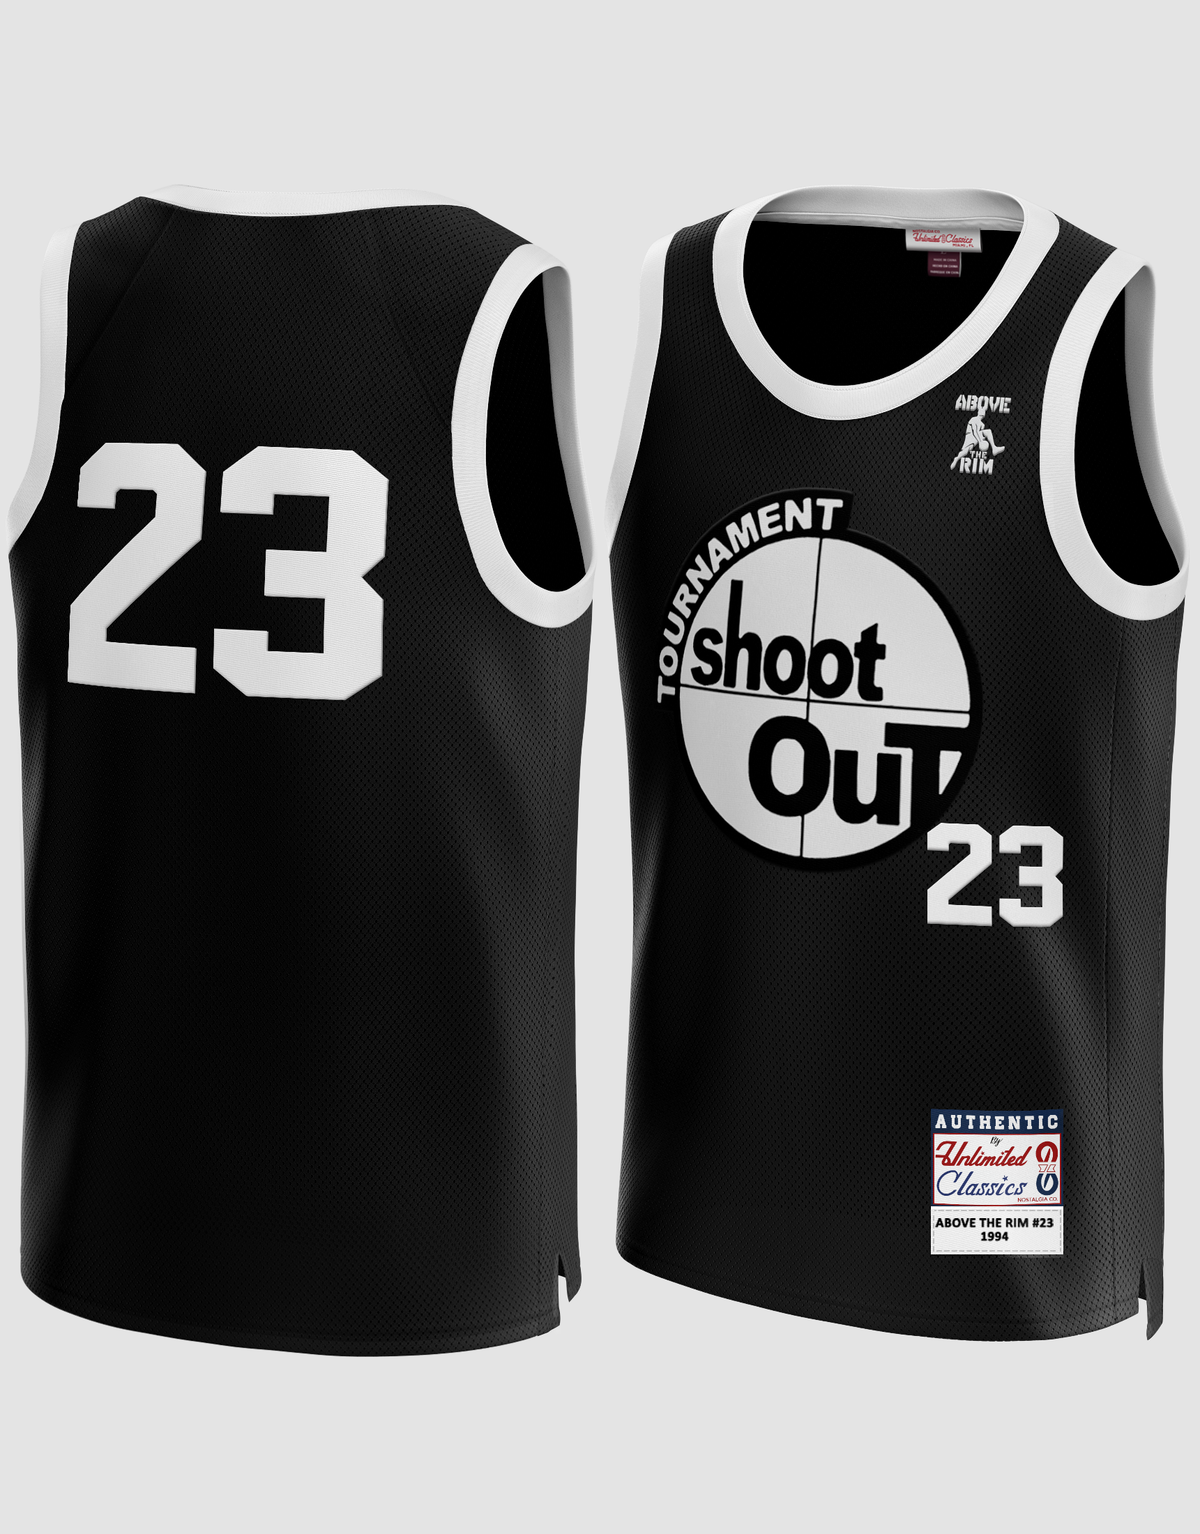 Motaw Tournament Shoot Out Above the Rim Movie Jersey, OG Jerseys